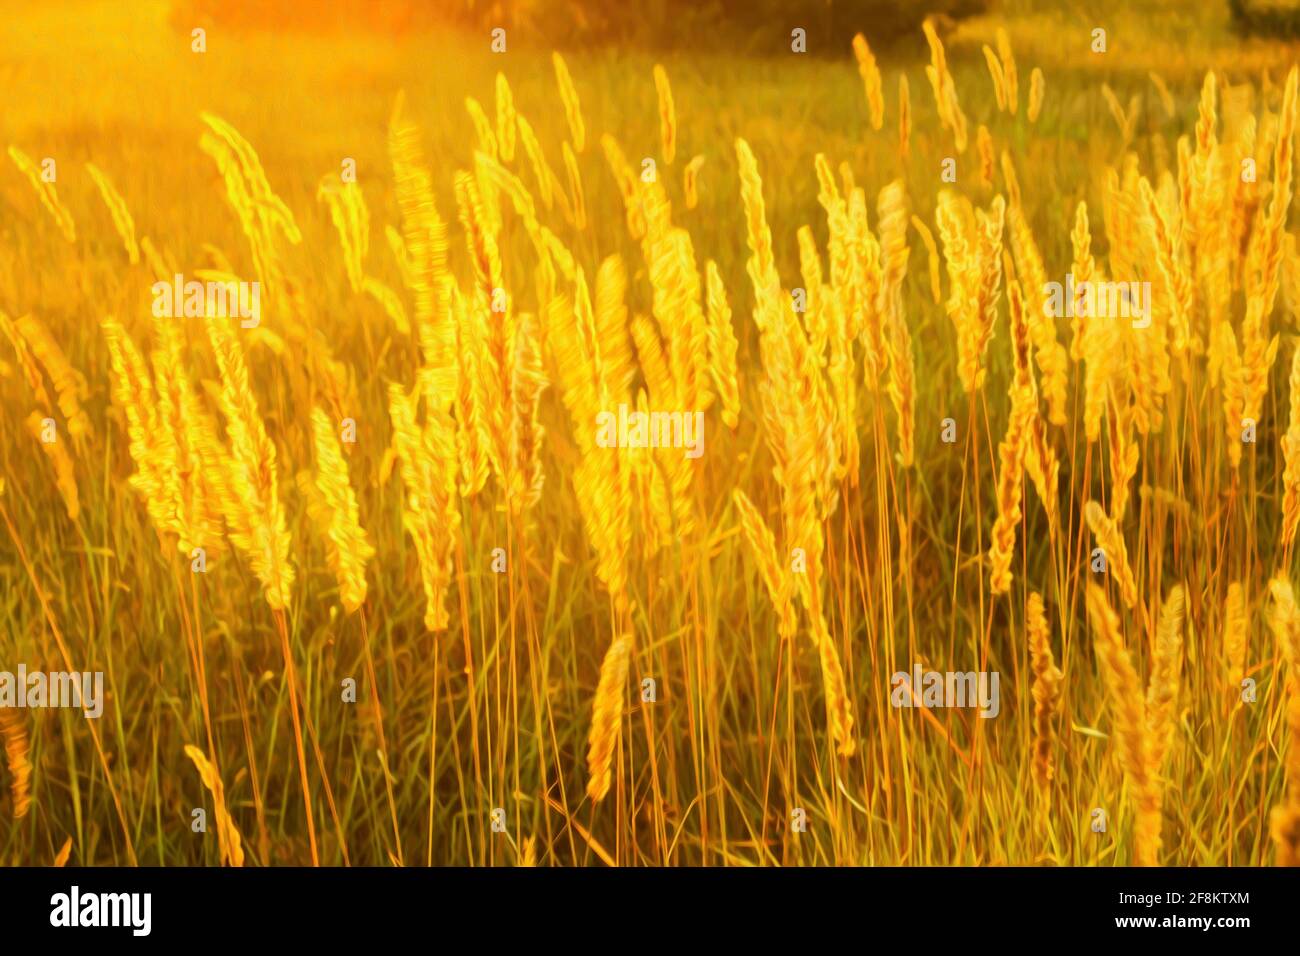 High meadow grass in the bright backlighting of setting sun as a texture Stock Photo